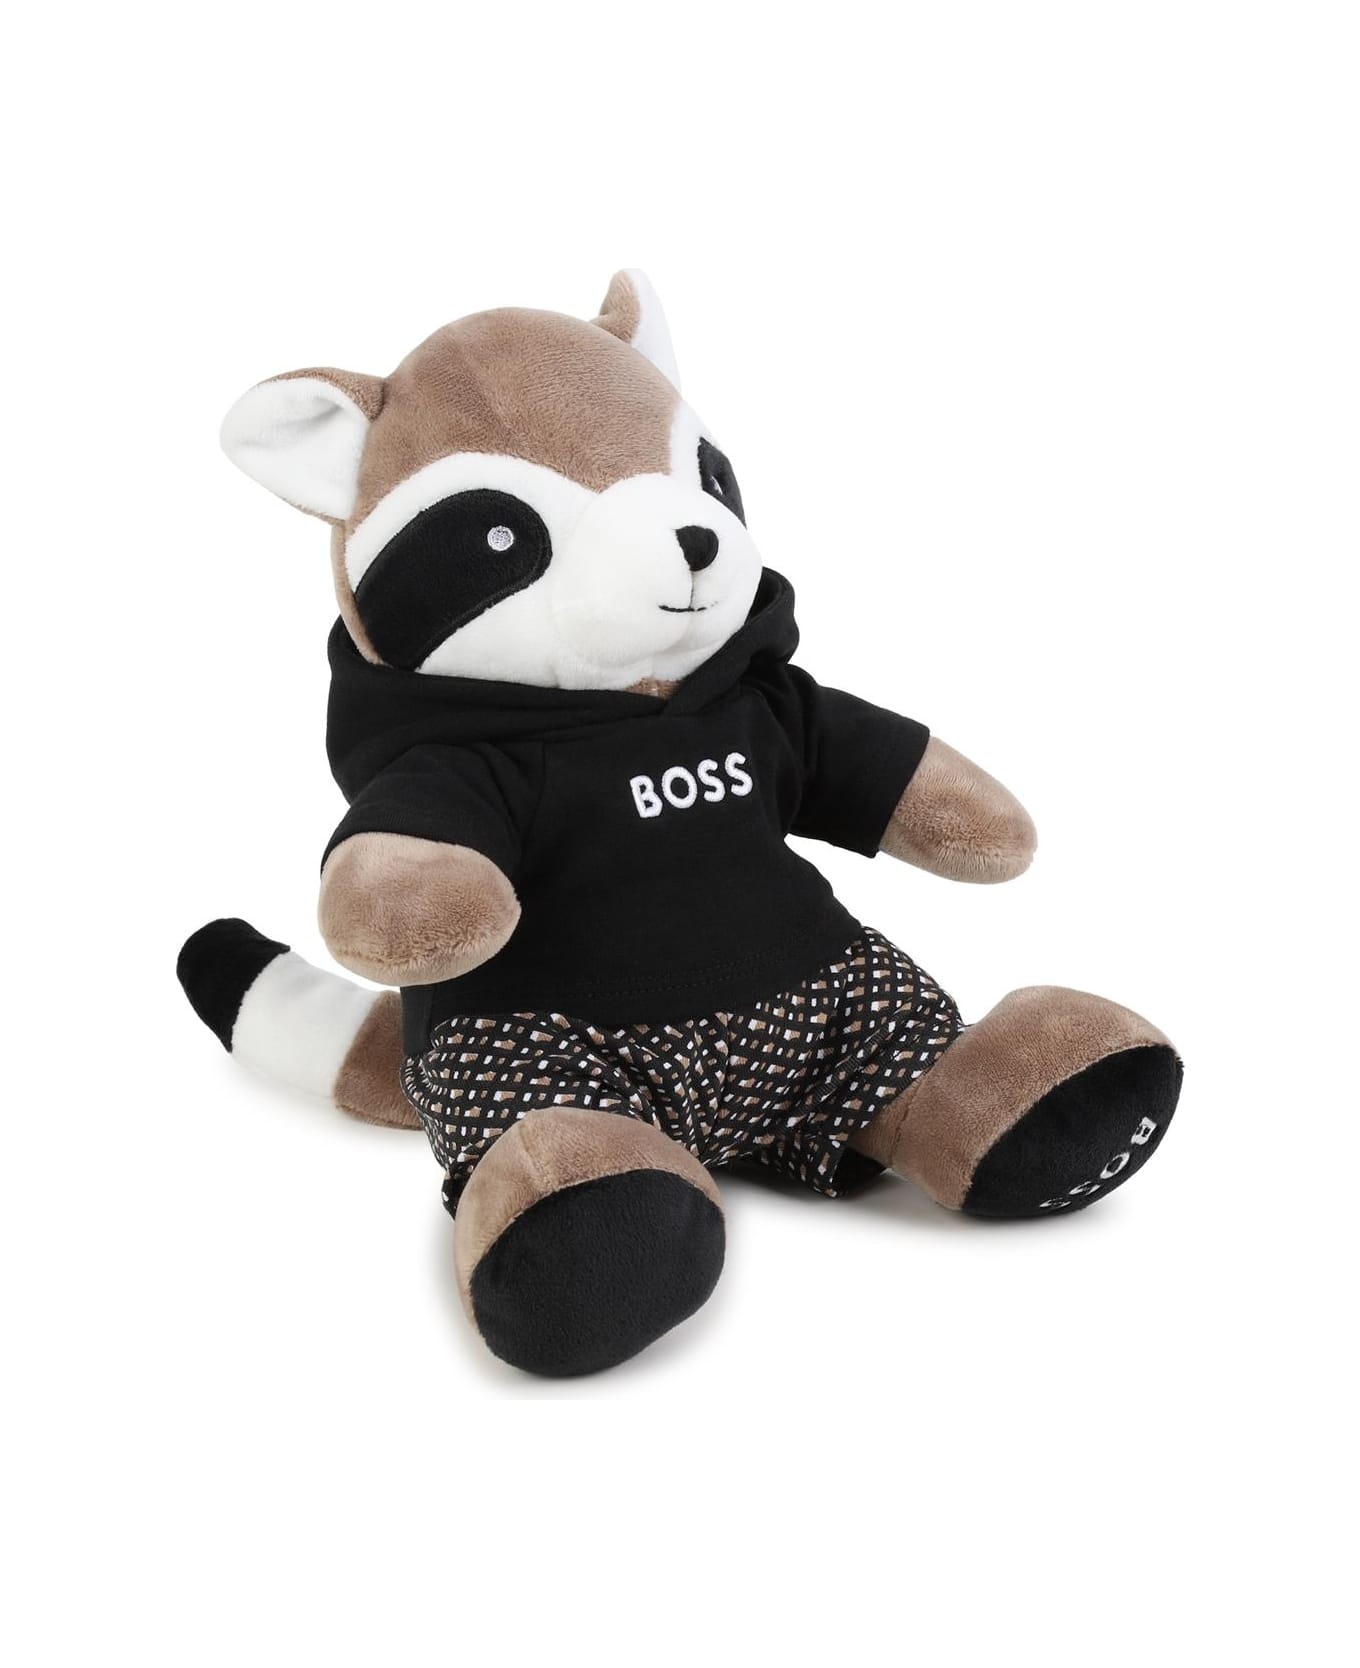 Hugo Boss Red Panda Plush With Embroidery - Beige